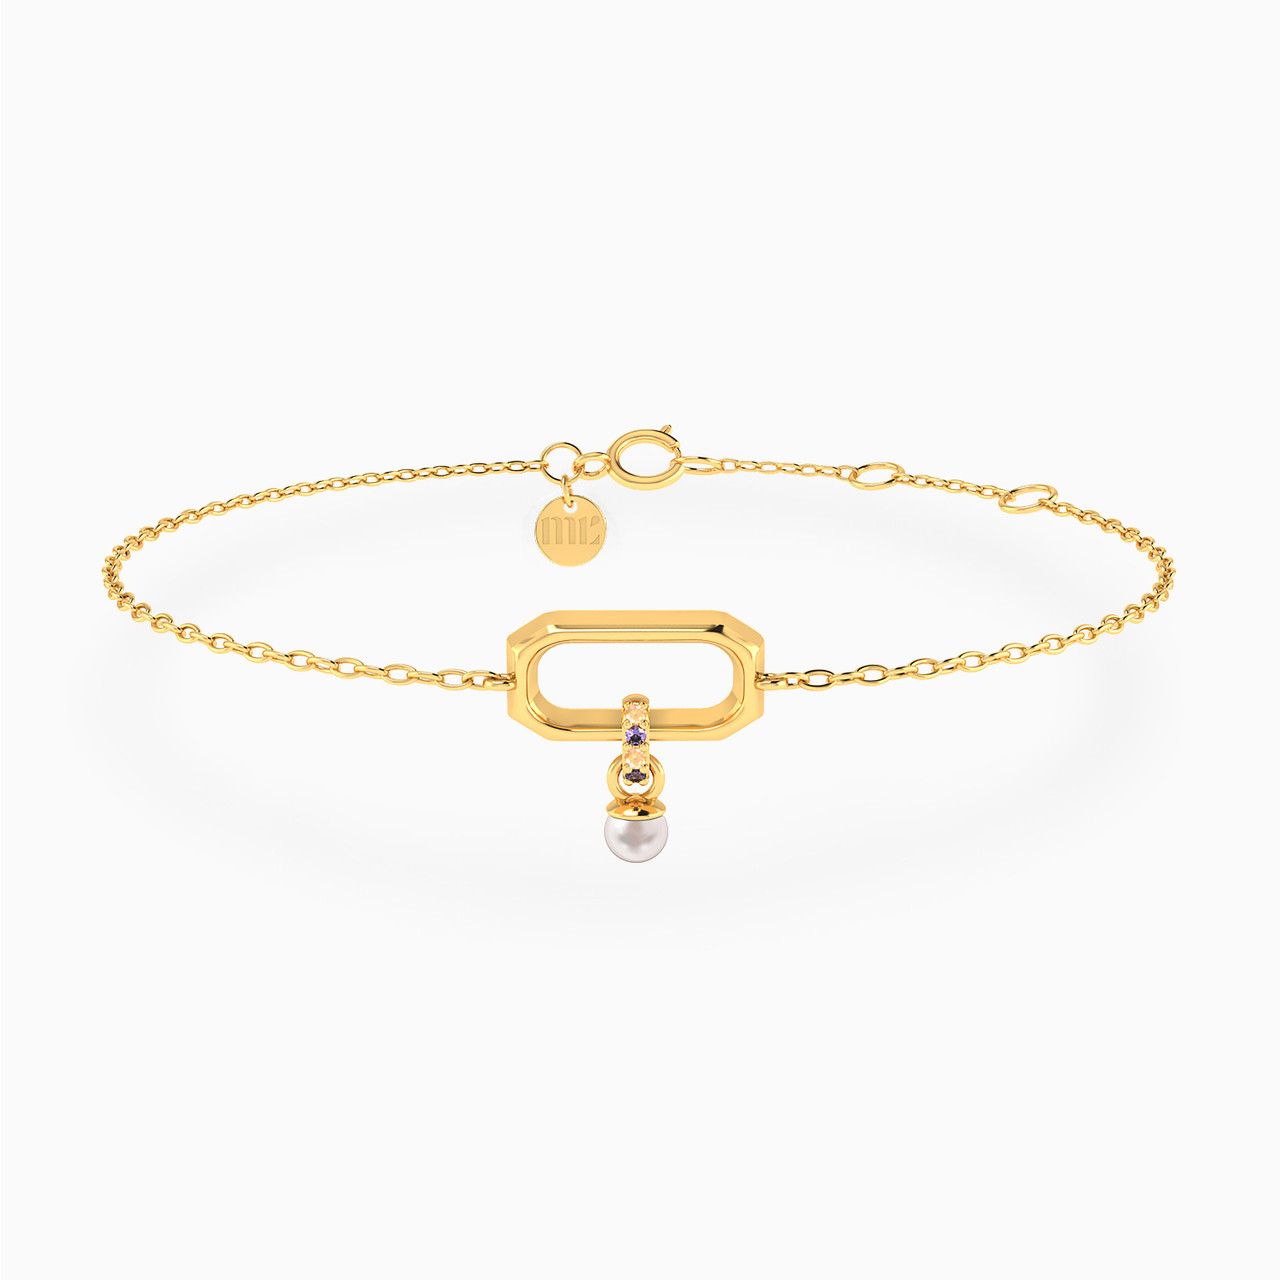 14K Gold Pearl & Colored Stones Chain Bracelet